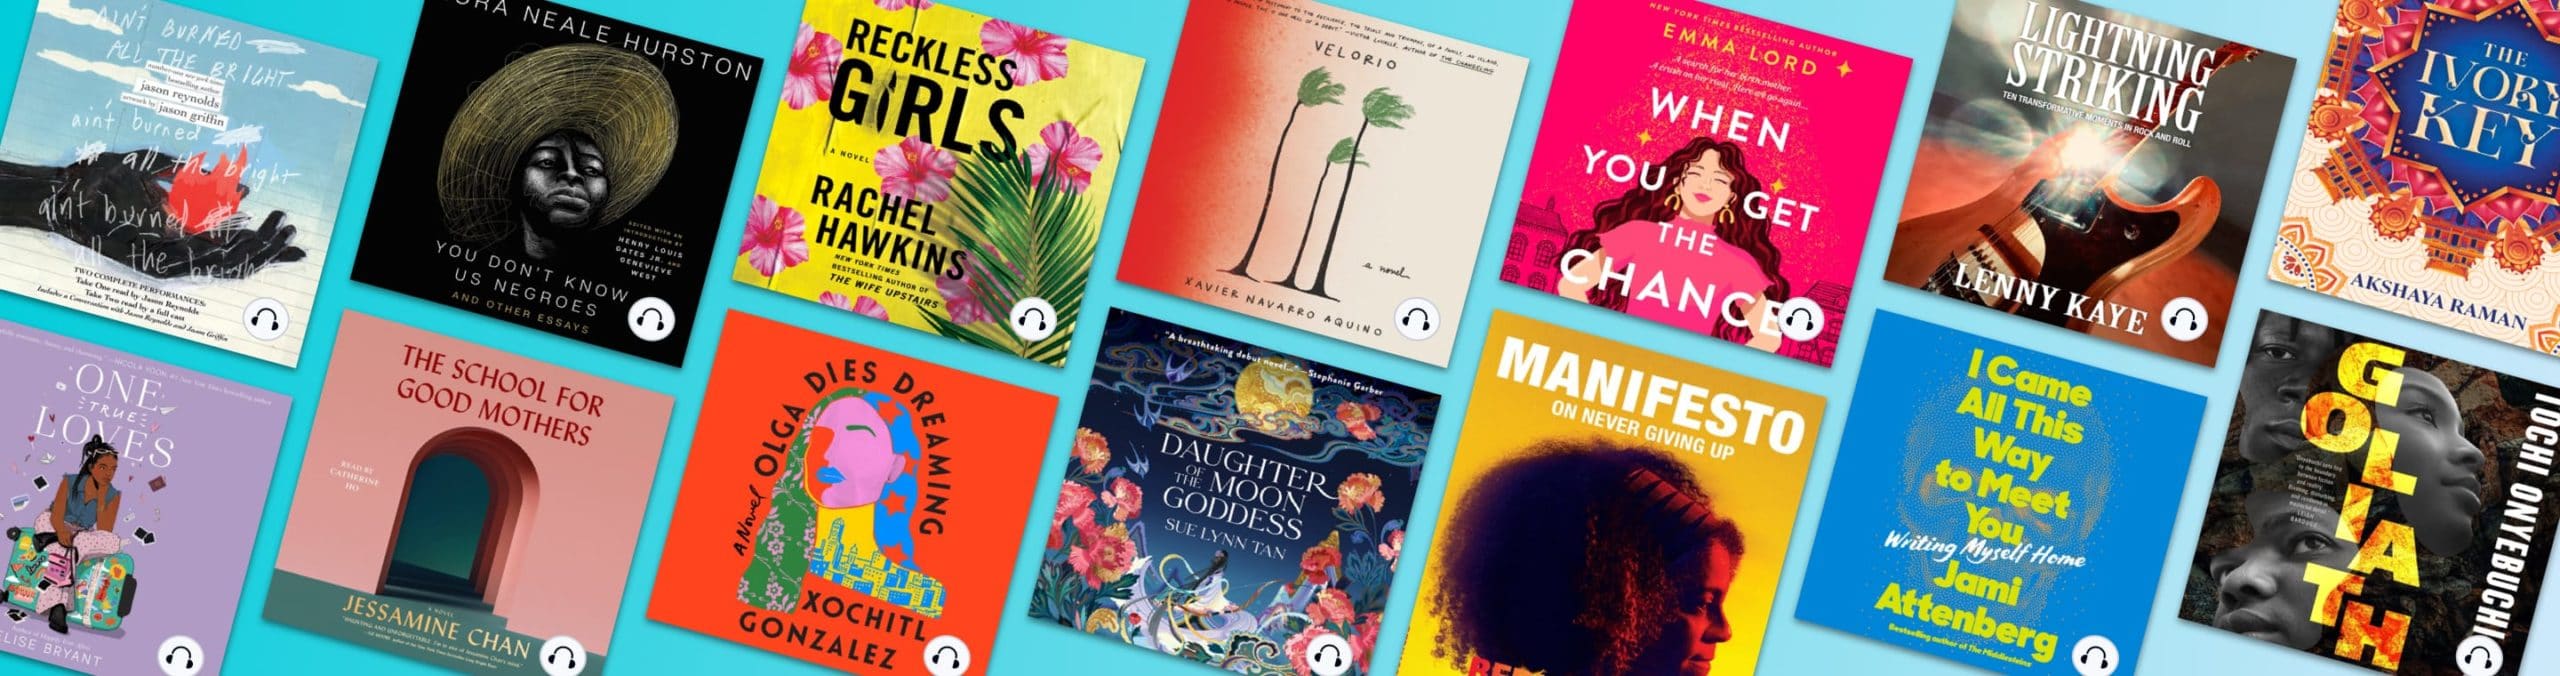 Start the year right with Januaryâ€™s Best New Books